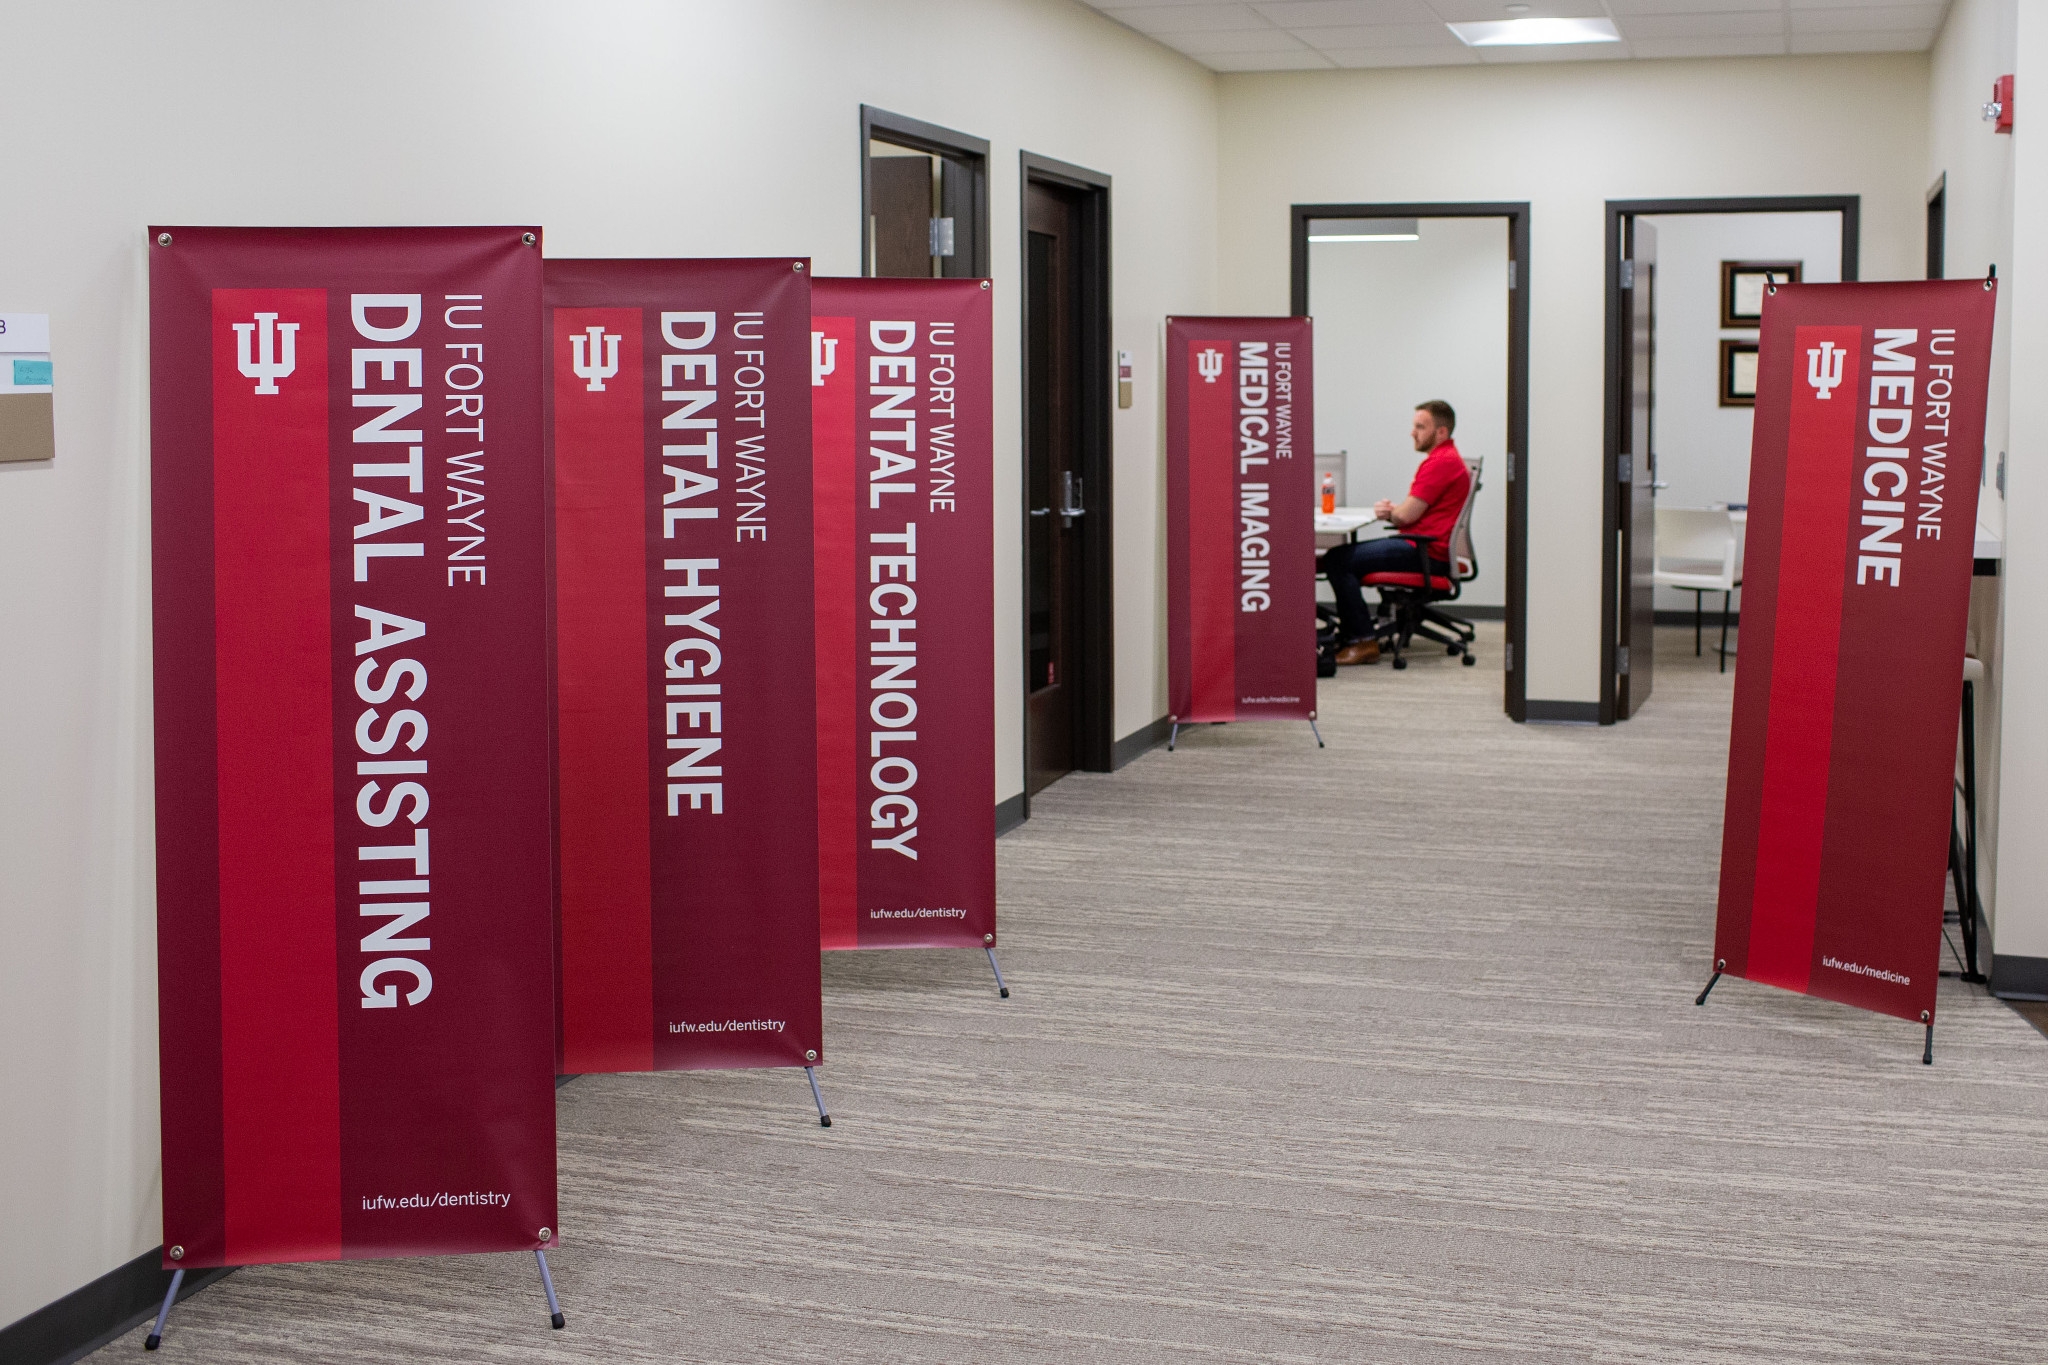 Program banners on display in the Student Central office at IU Fort Wayne.